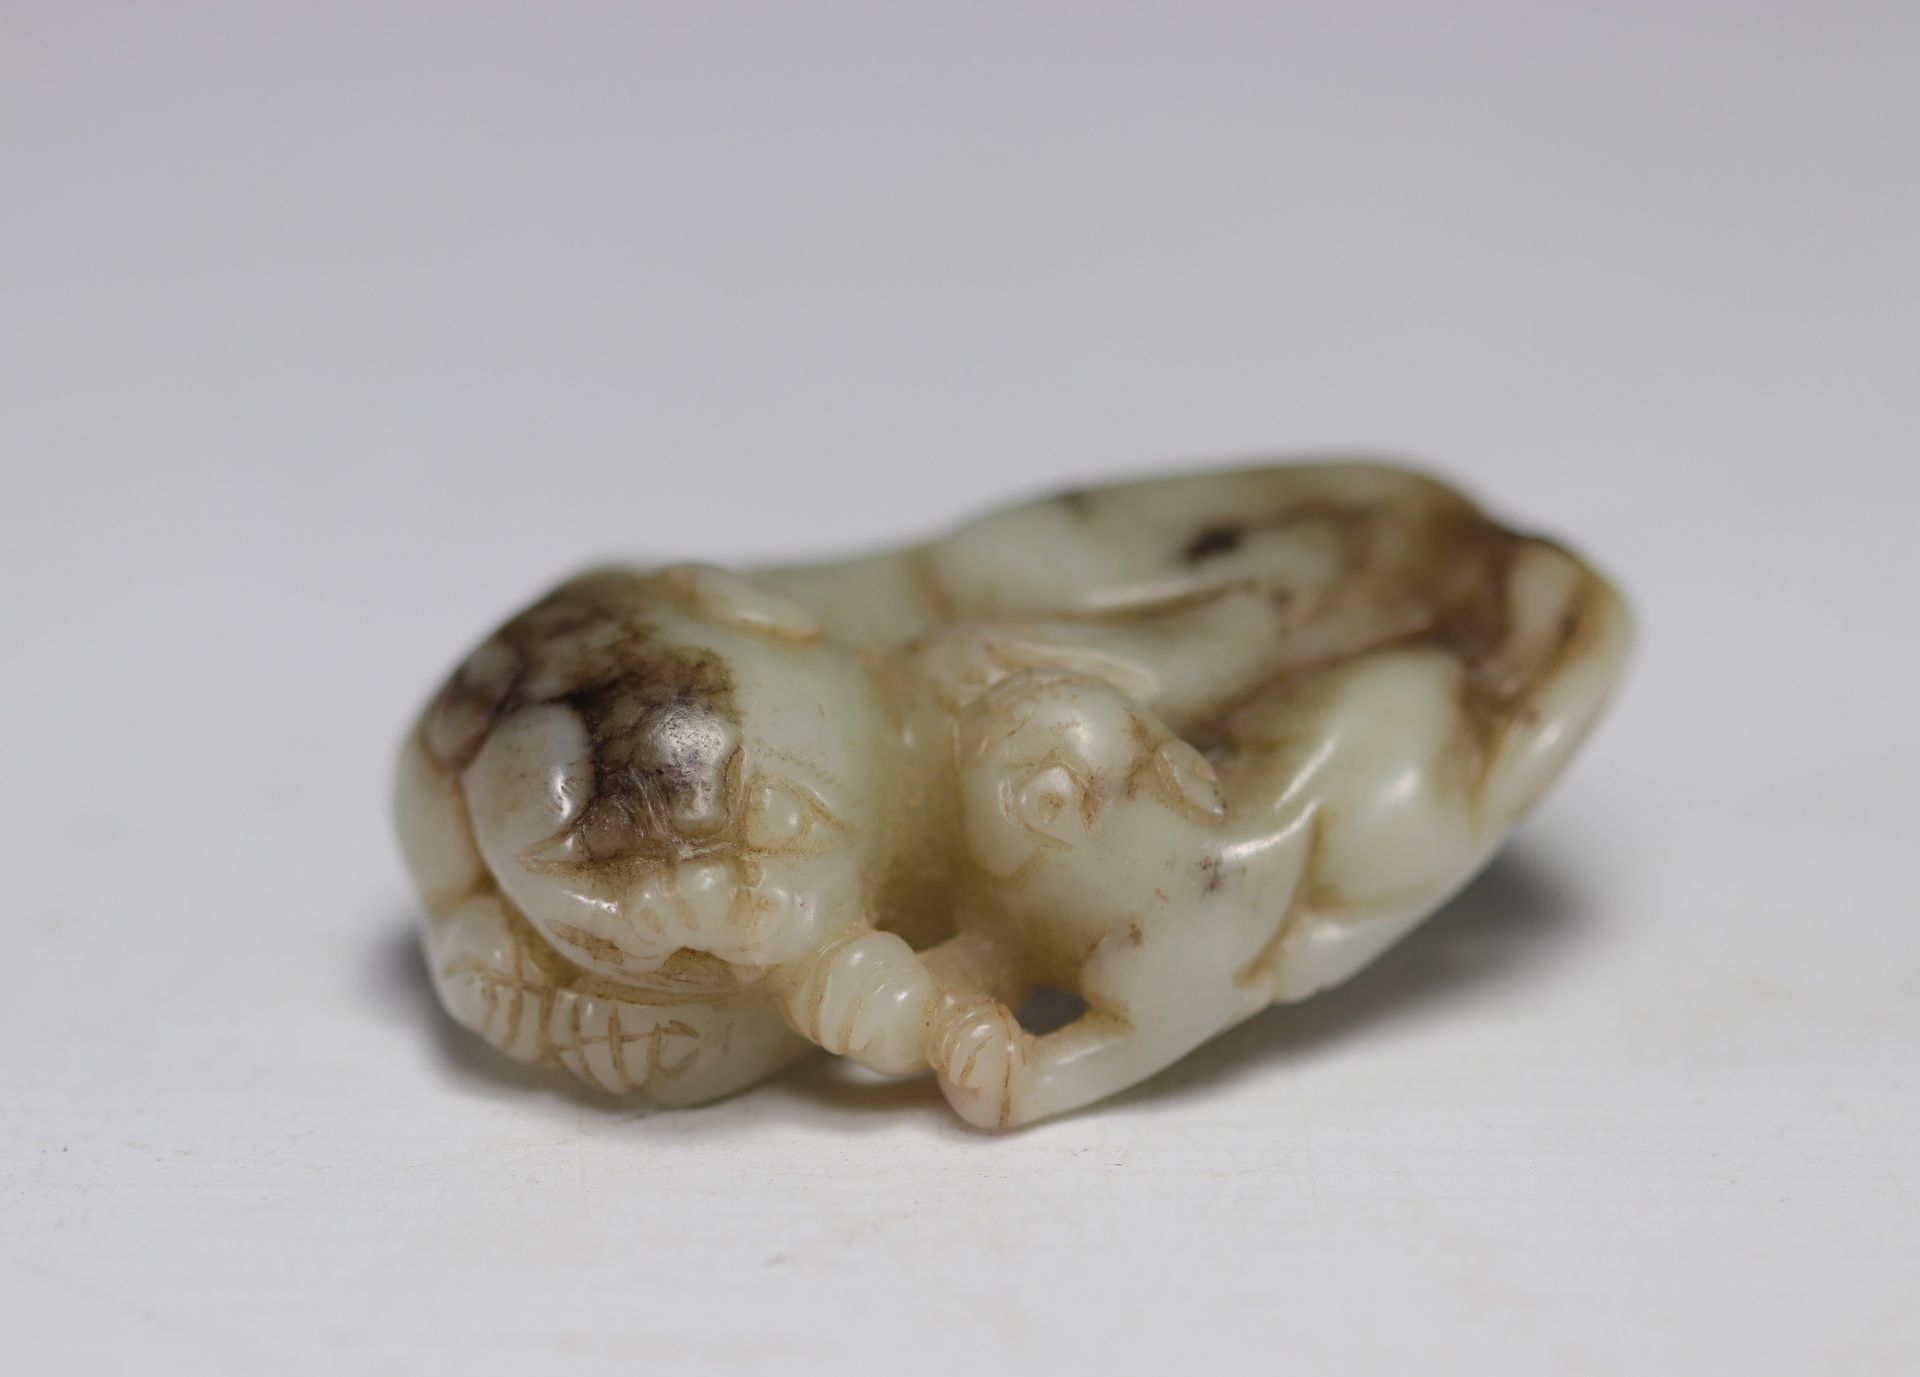 China - Carved jade reclining lions, 18th century. - Image 9 of 9